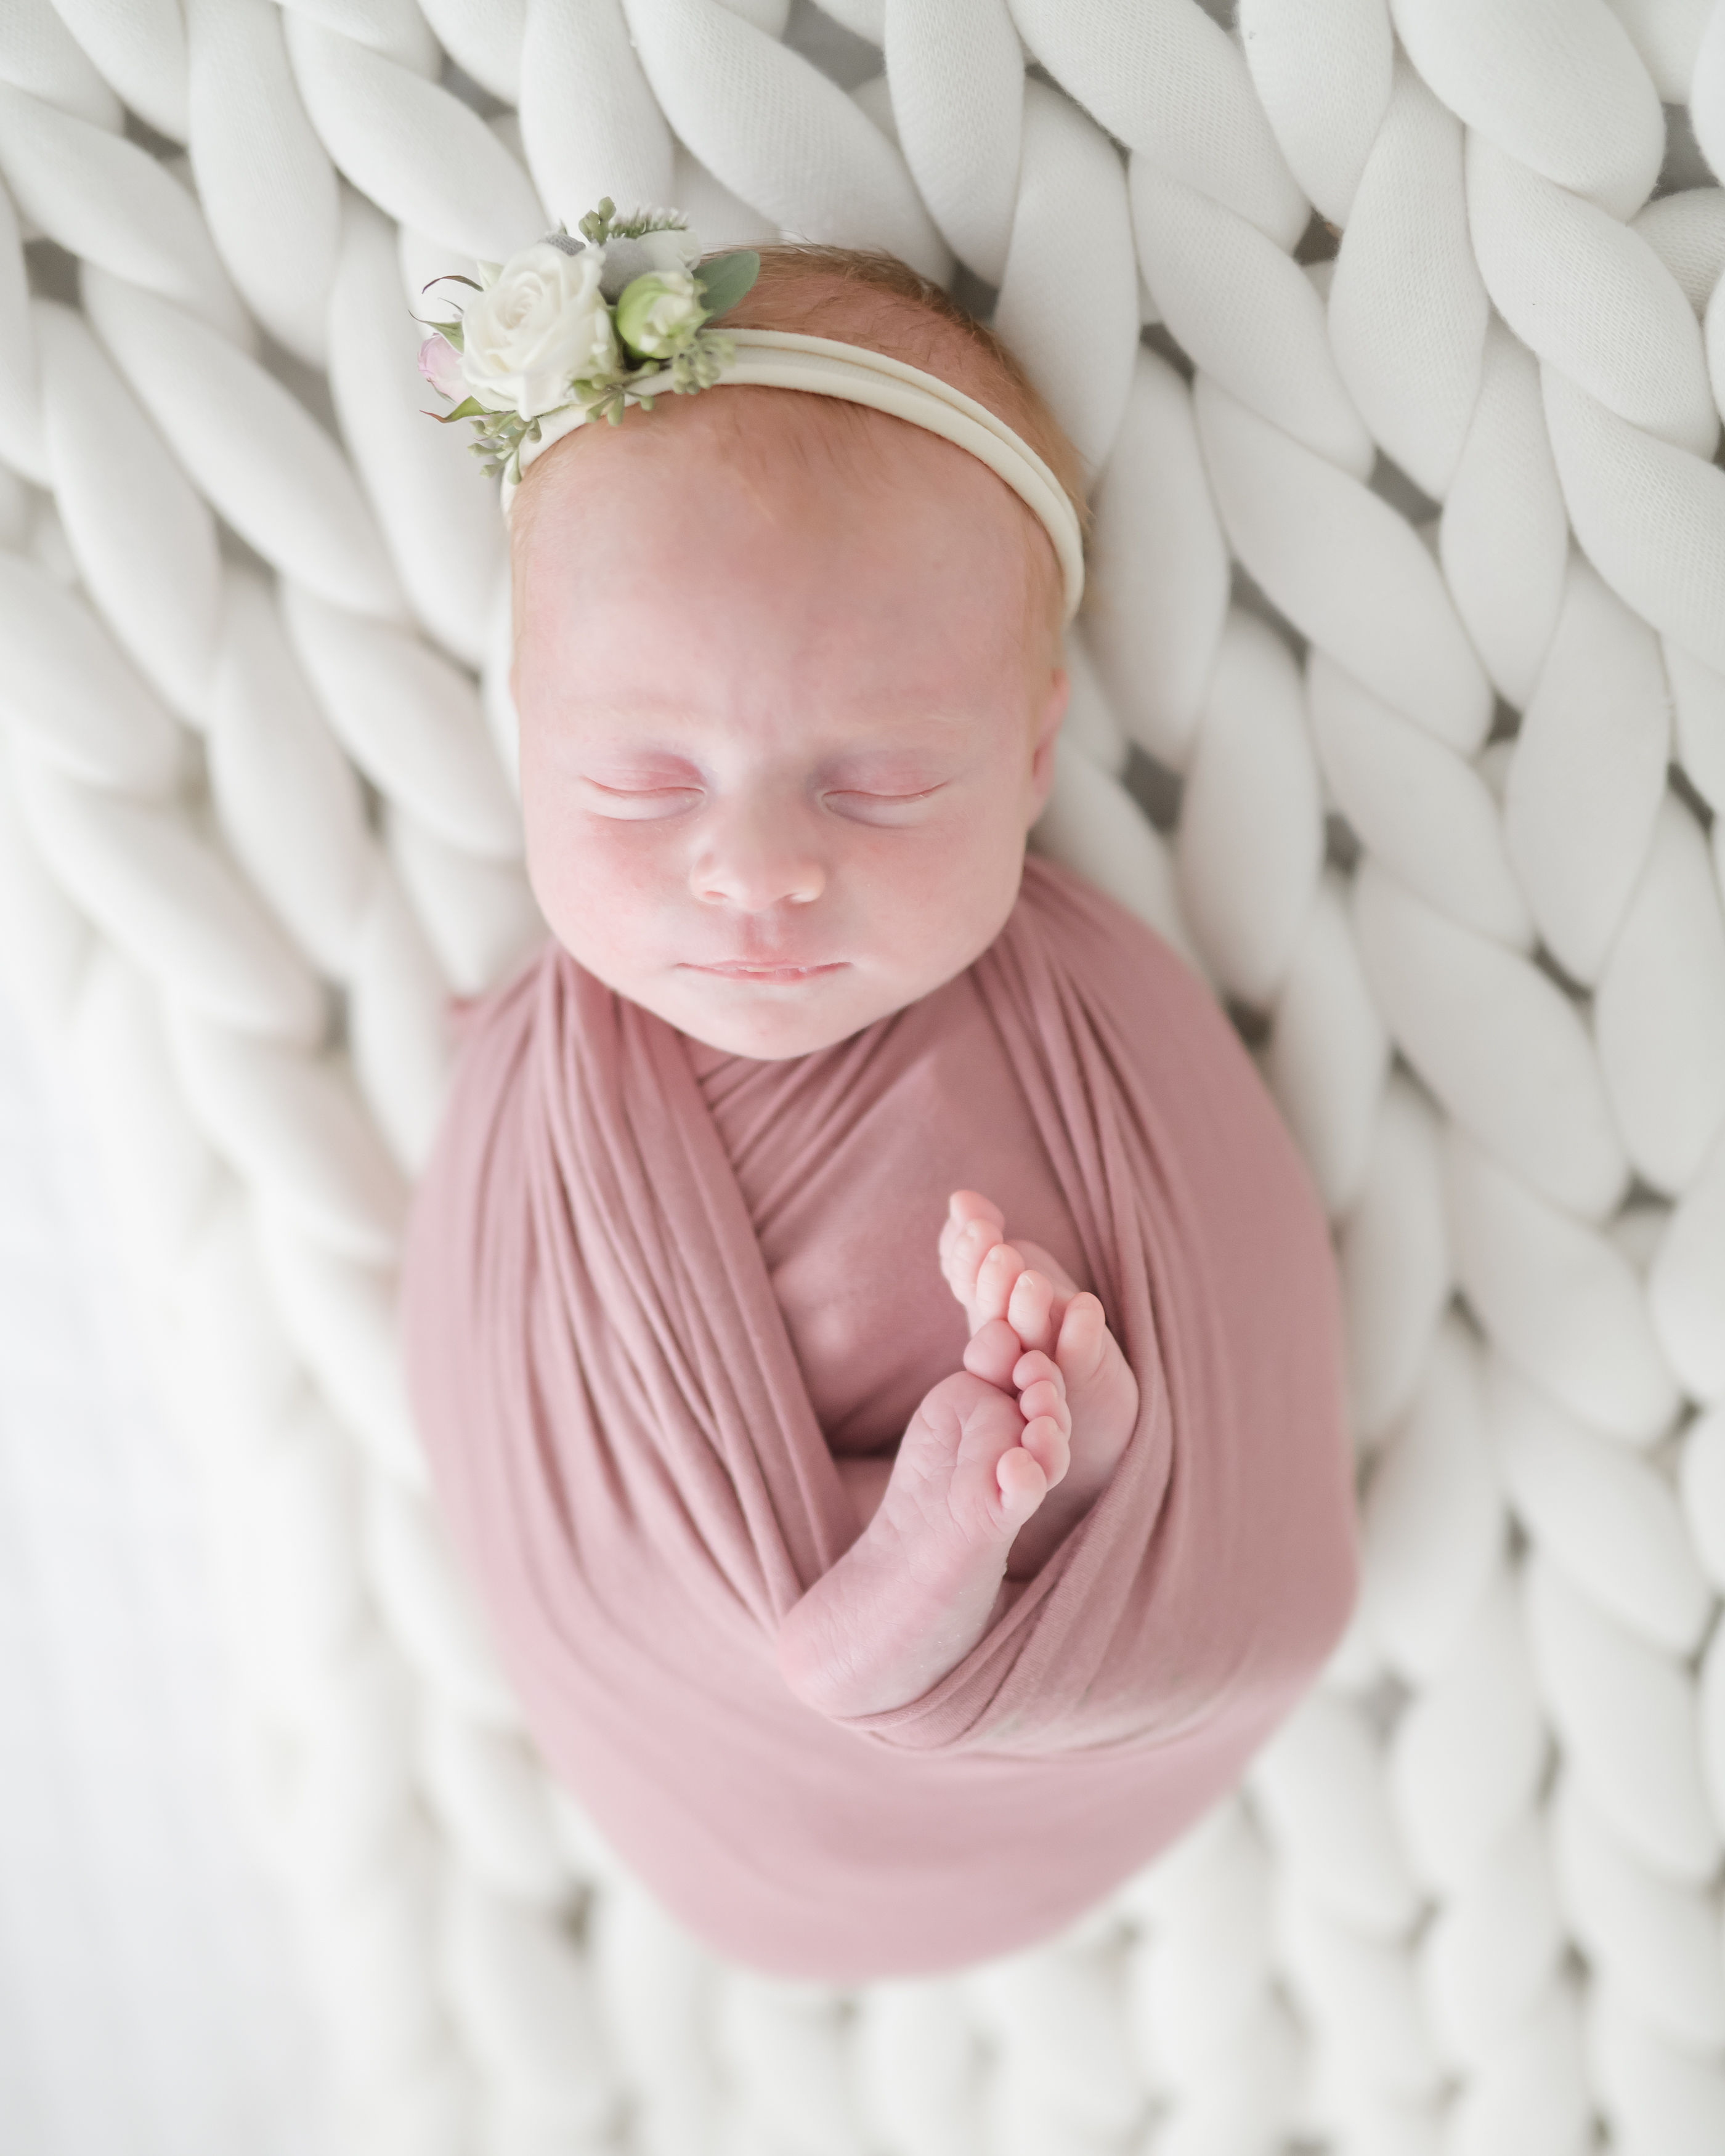 Boho floral newborn photoshoot with our 2.5 day old baby girl! Styled newborn photoshoot inspiration with Mom, Dad, baby and doggie!